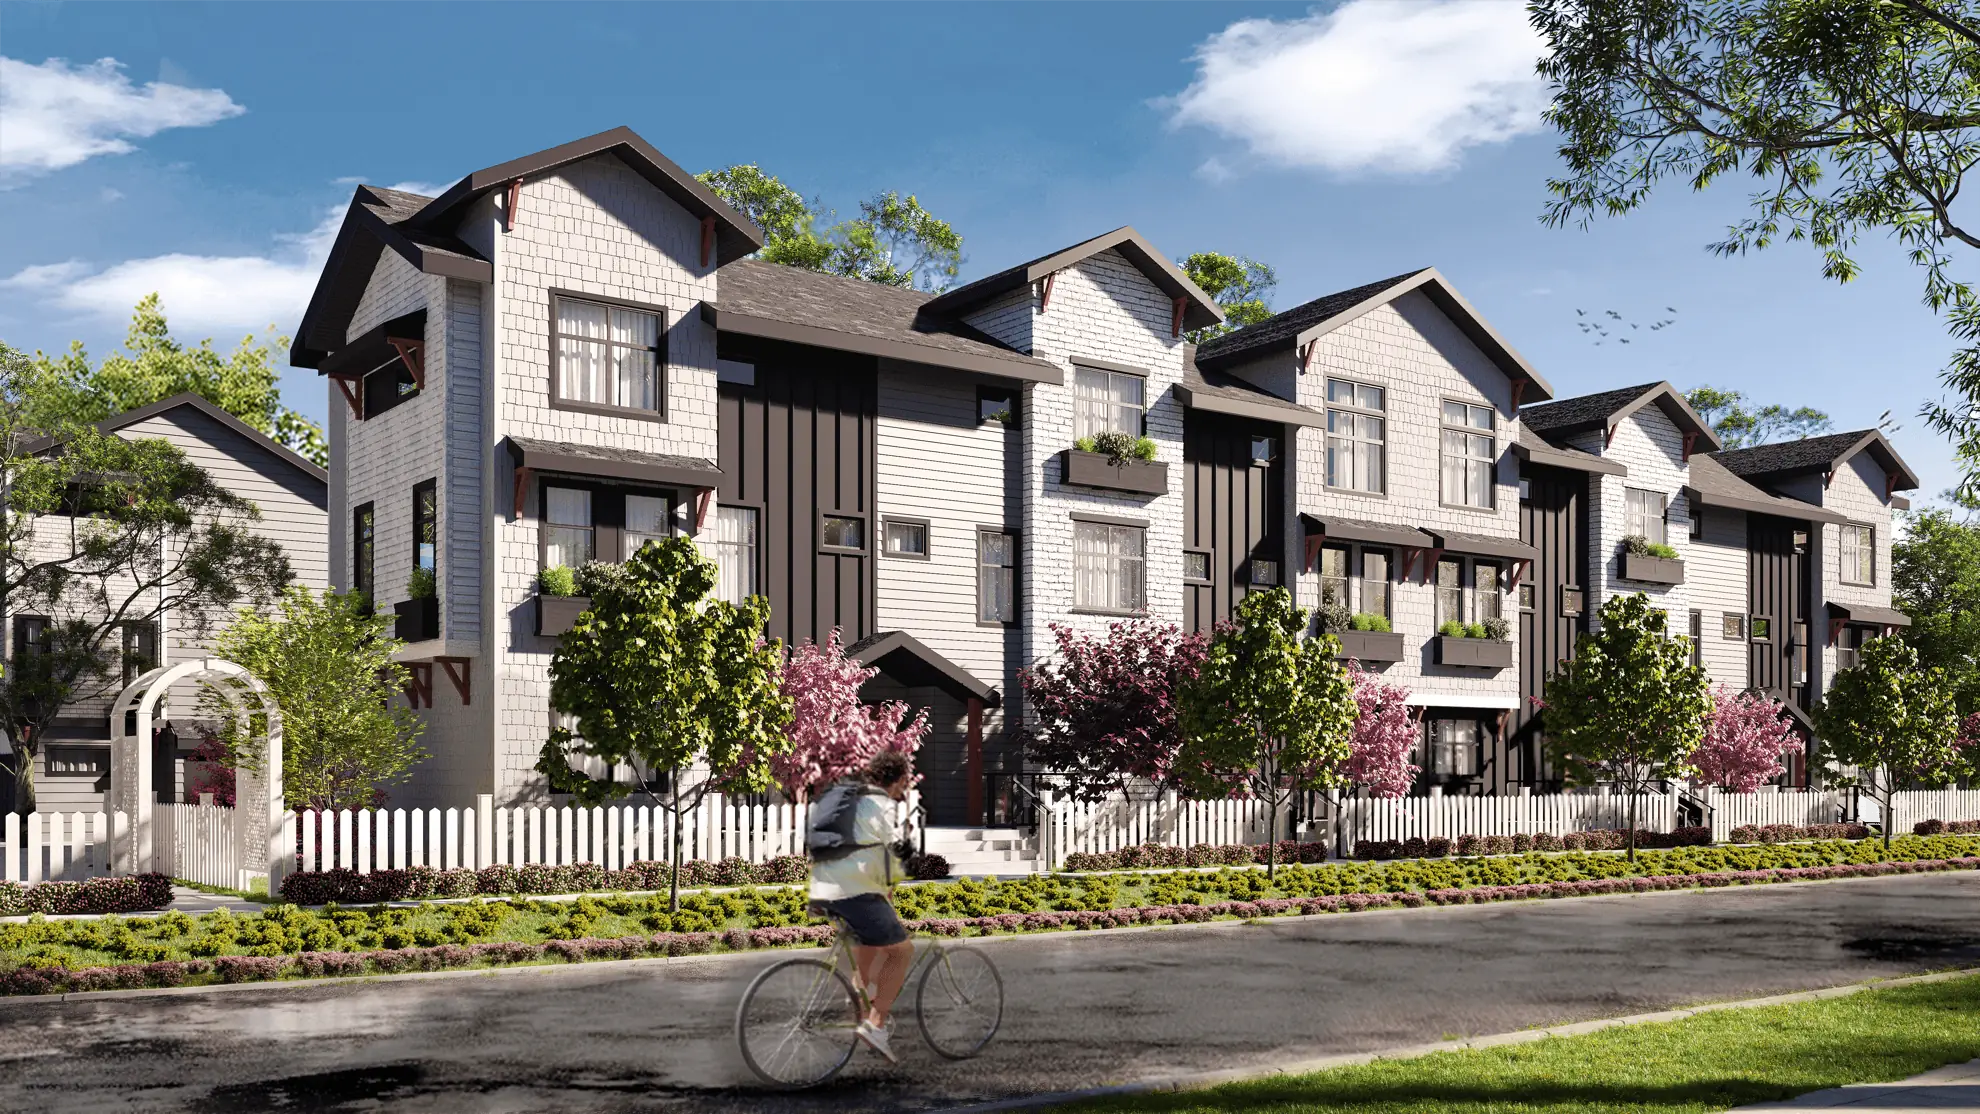 Gordon Square townhomes by Paddington Properties is a 32-unit Langley townhome development.